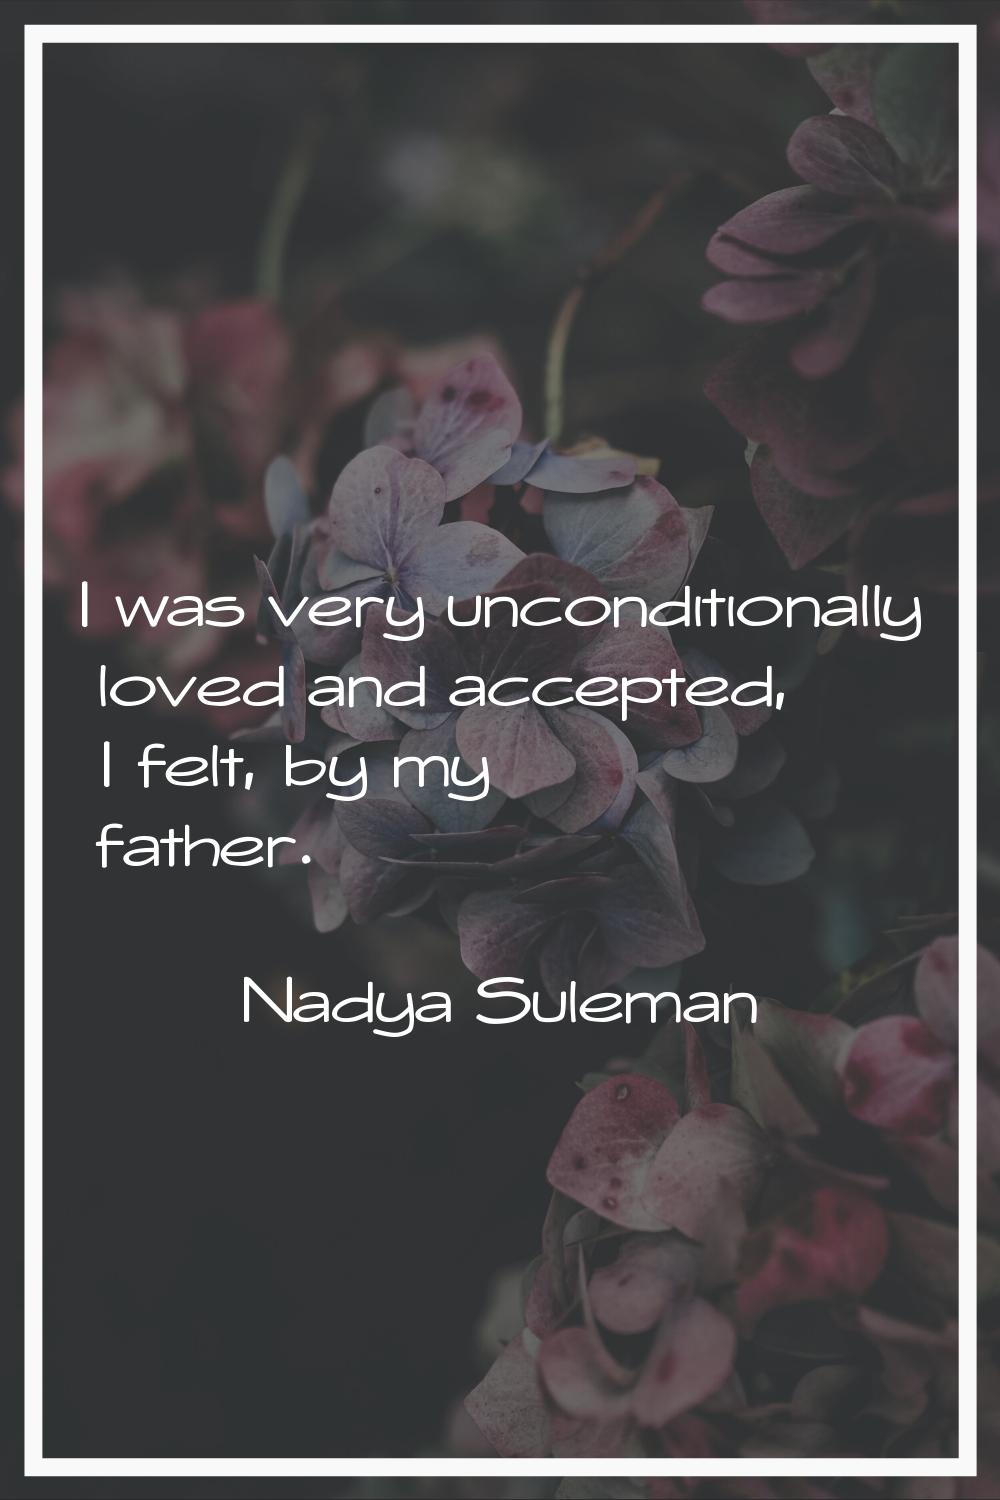 I was very unconditionally loved and accepted, I felt, by my father.